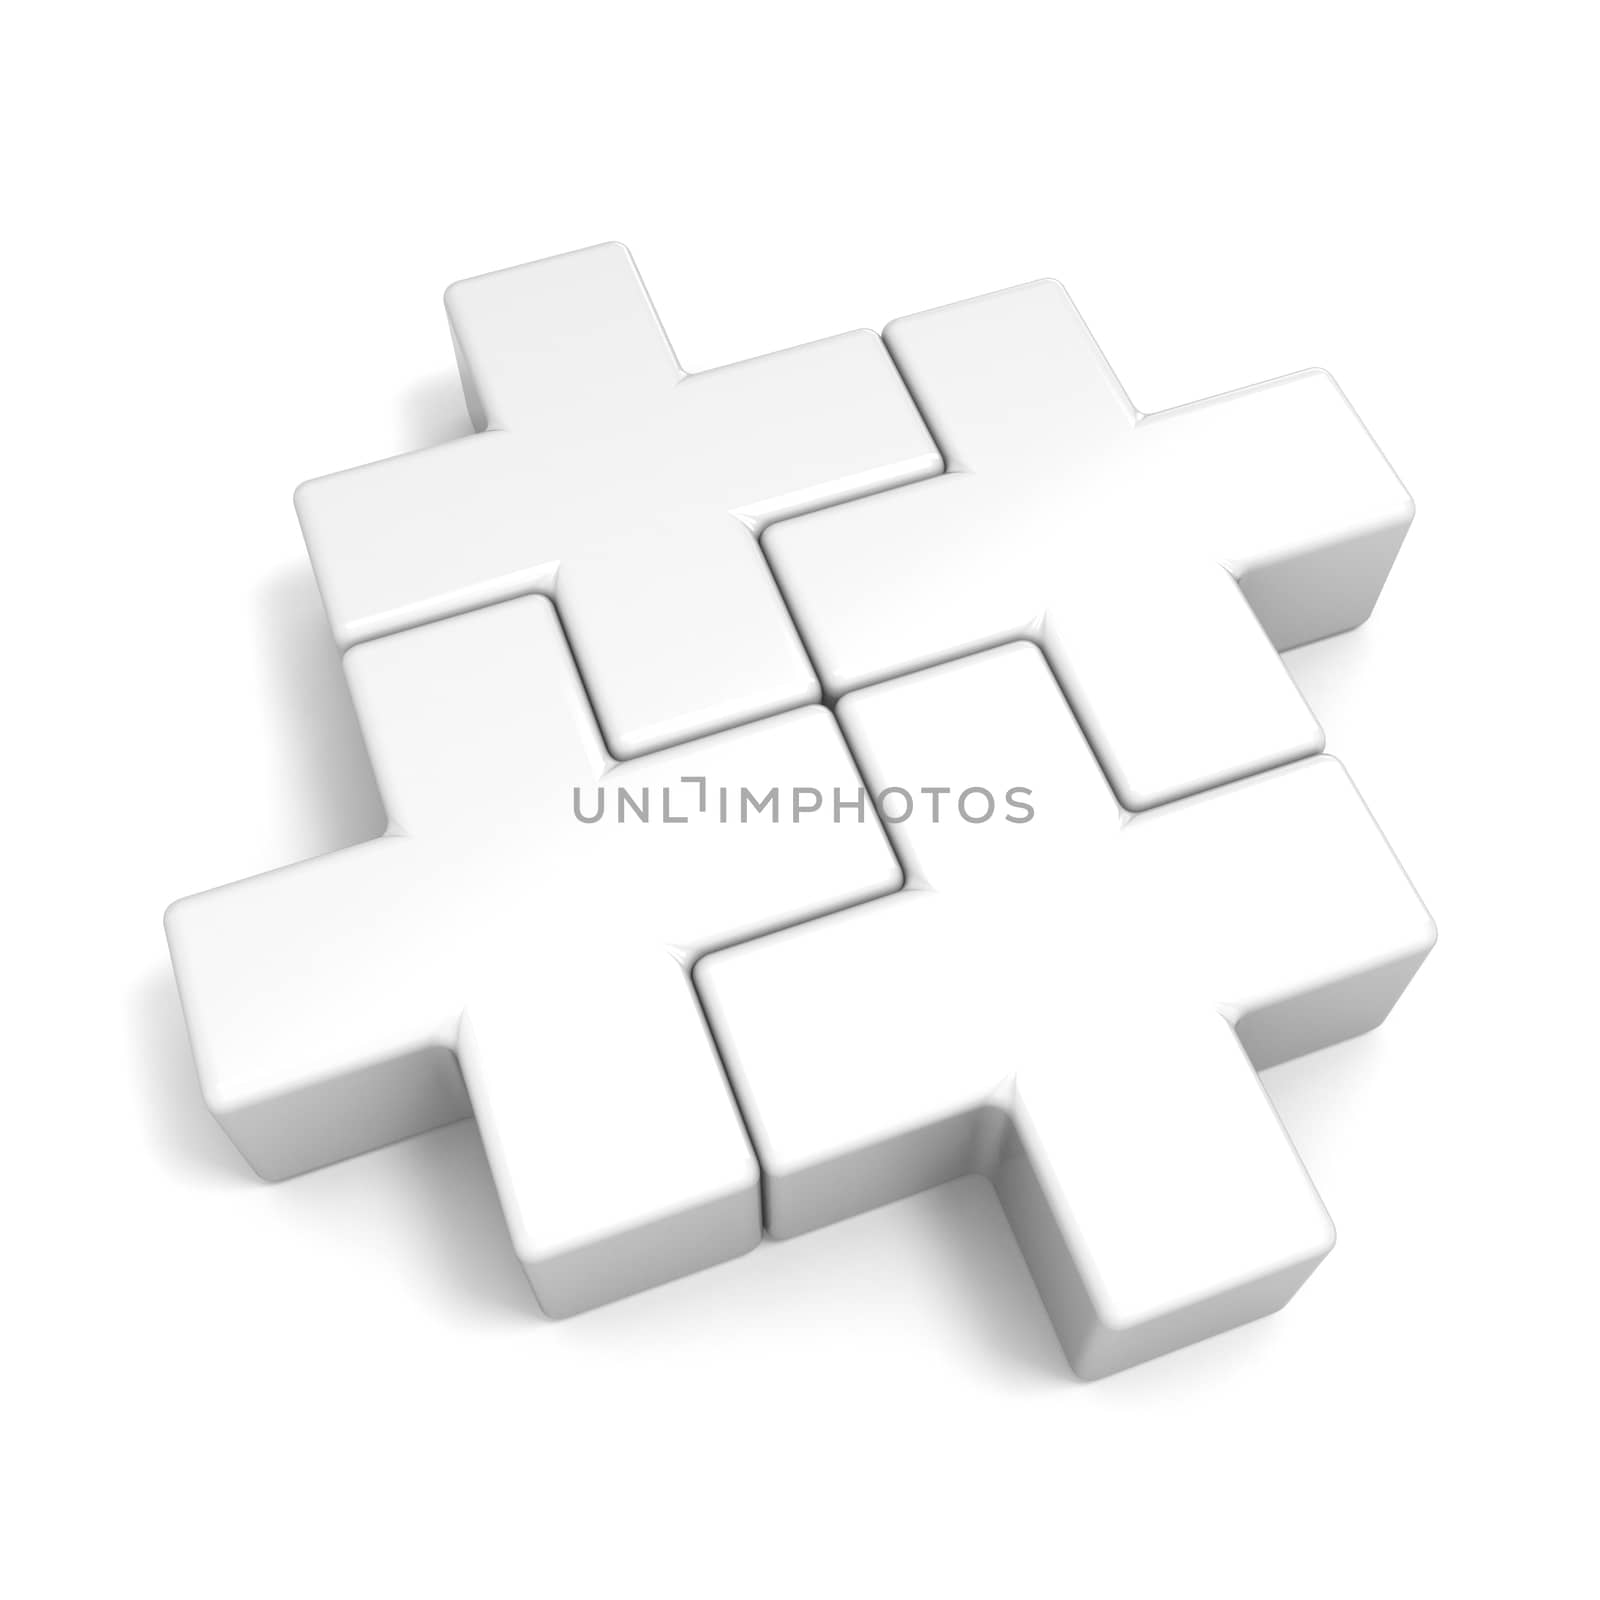 White abstract plus jigsaw puzzle pieces. 3D by djmilic